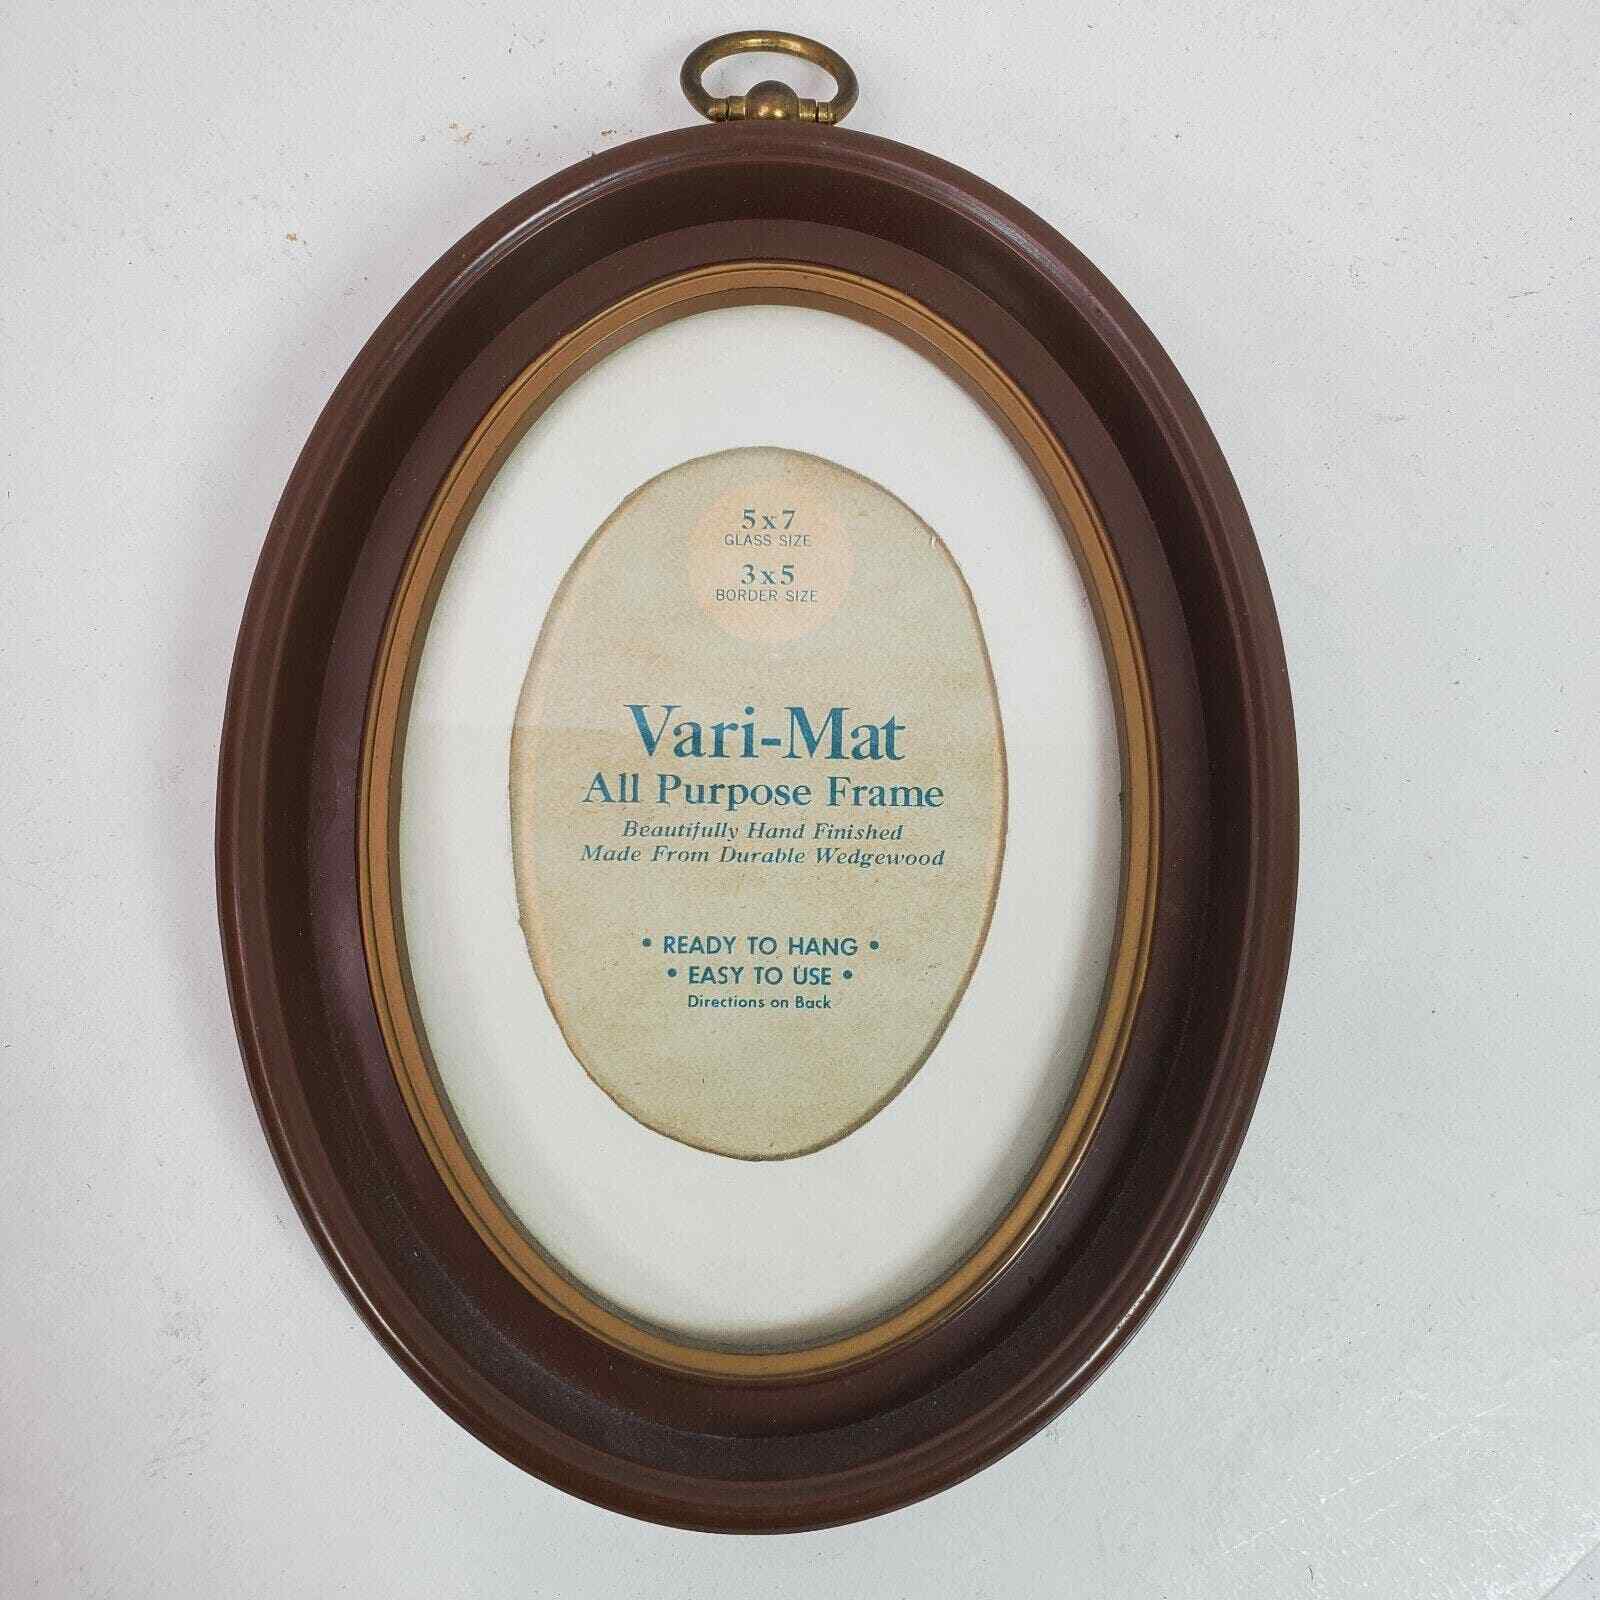 Vintage 1970s Oval Photo Frame 8x6 Inch Brown Durable Wedgewood